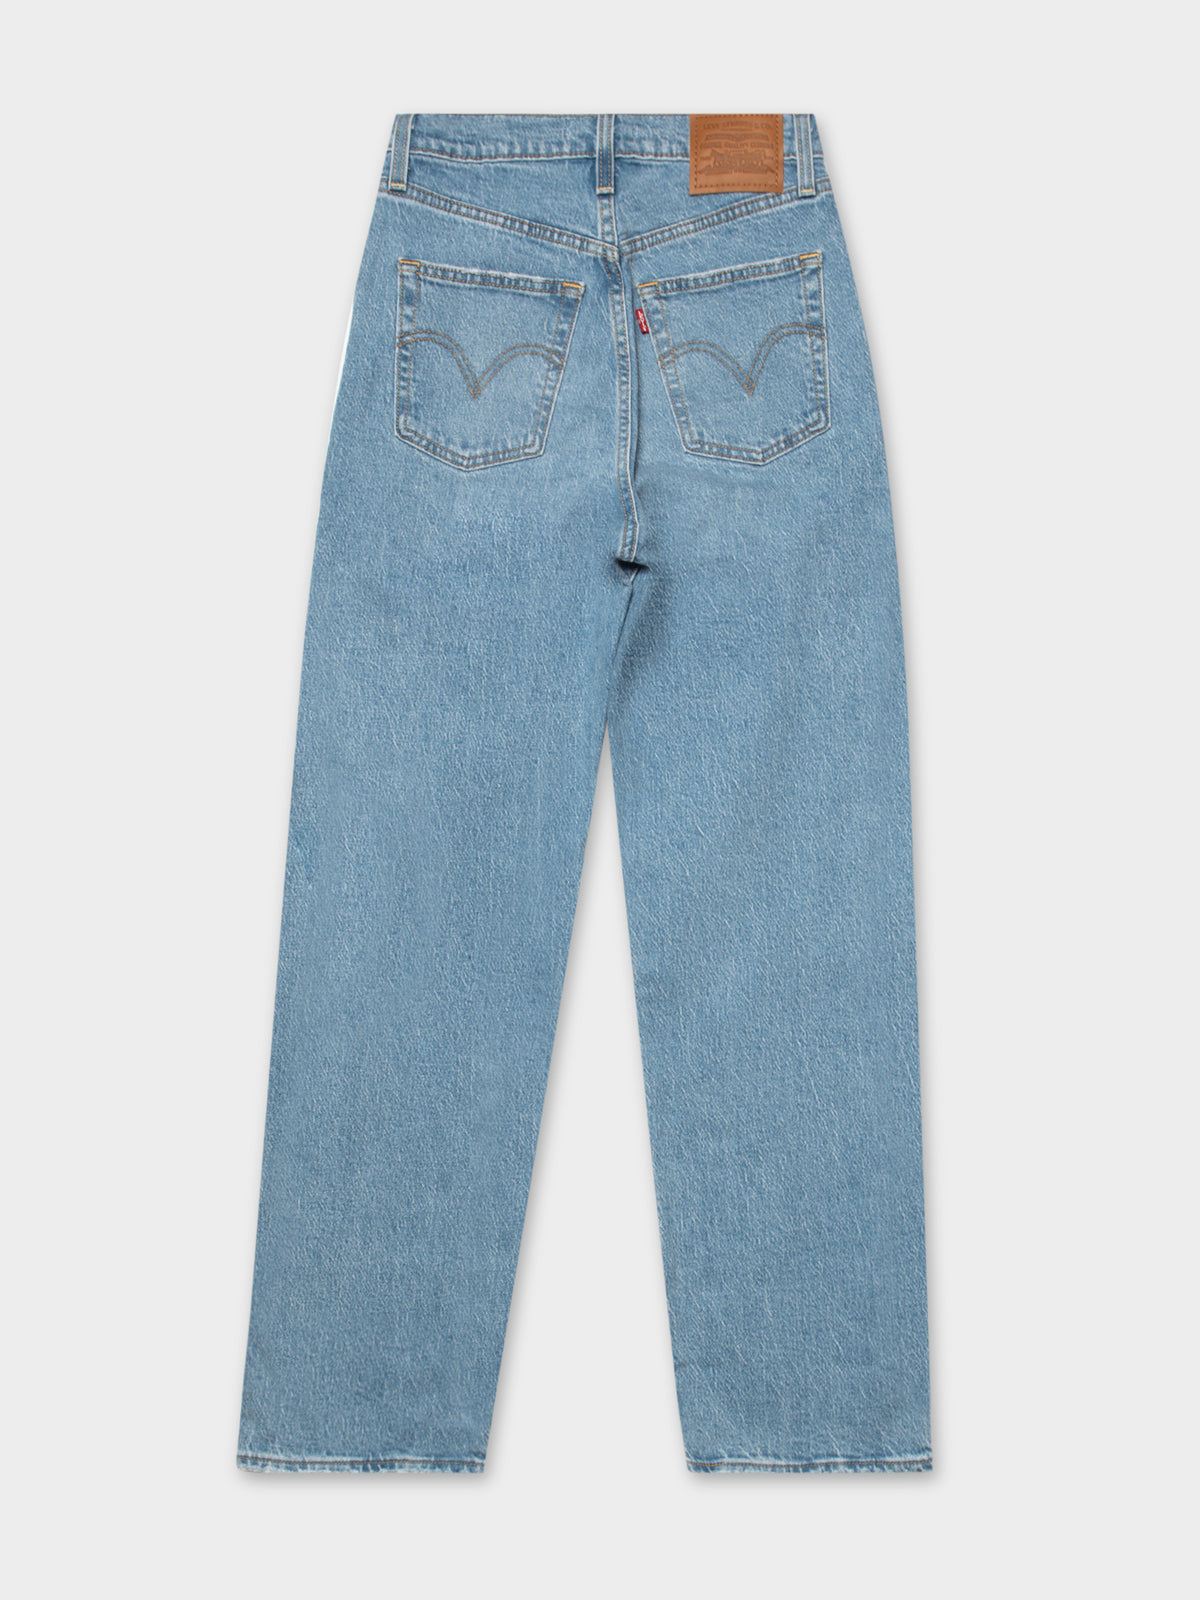 Ribcage Straight Ankle Jeans in Samba Done Blue